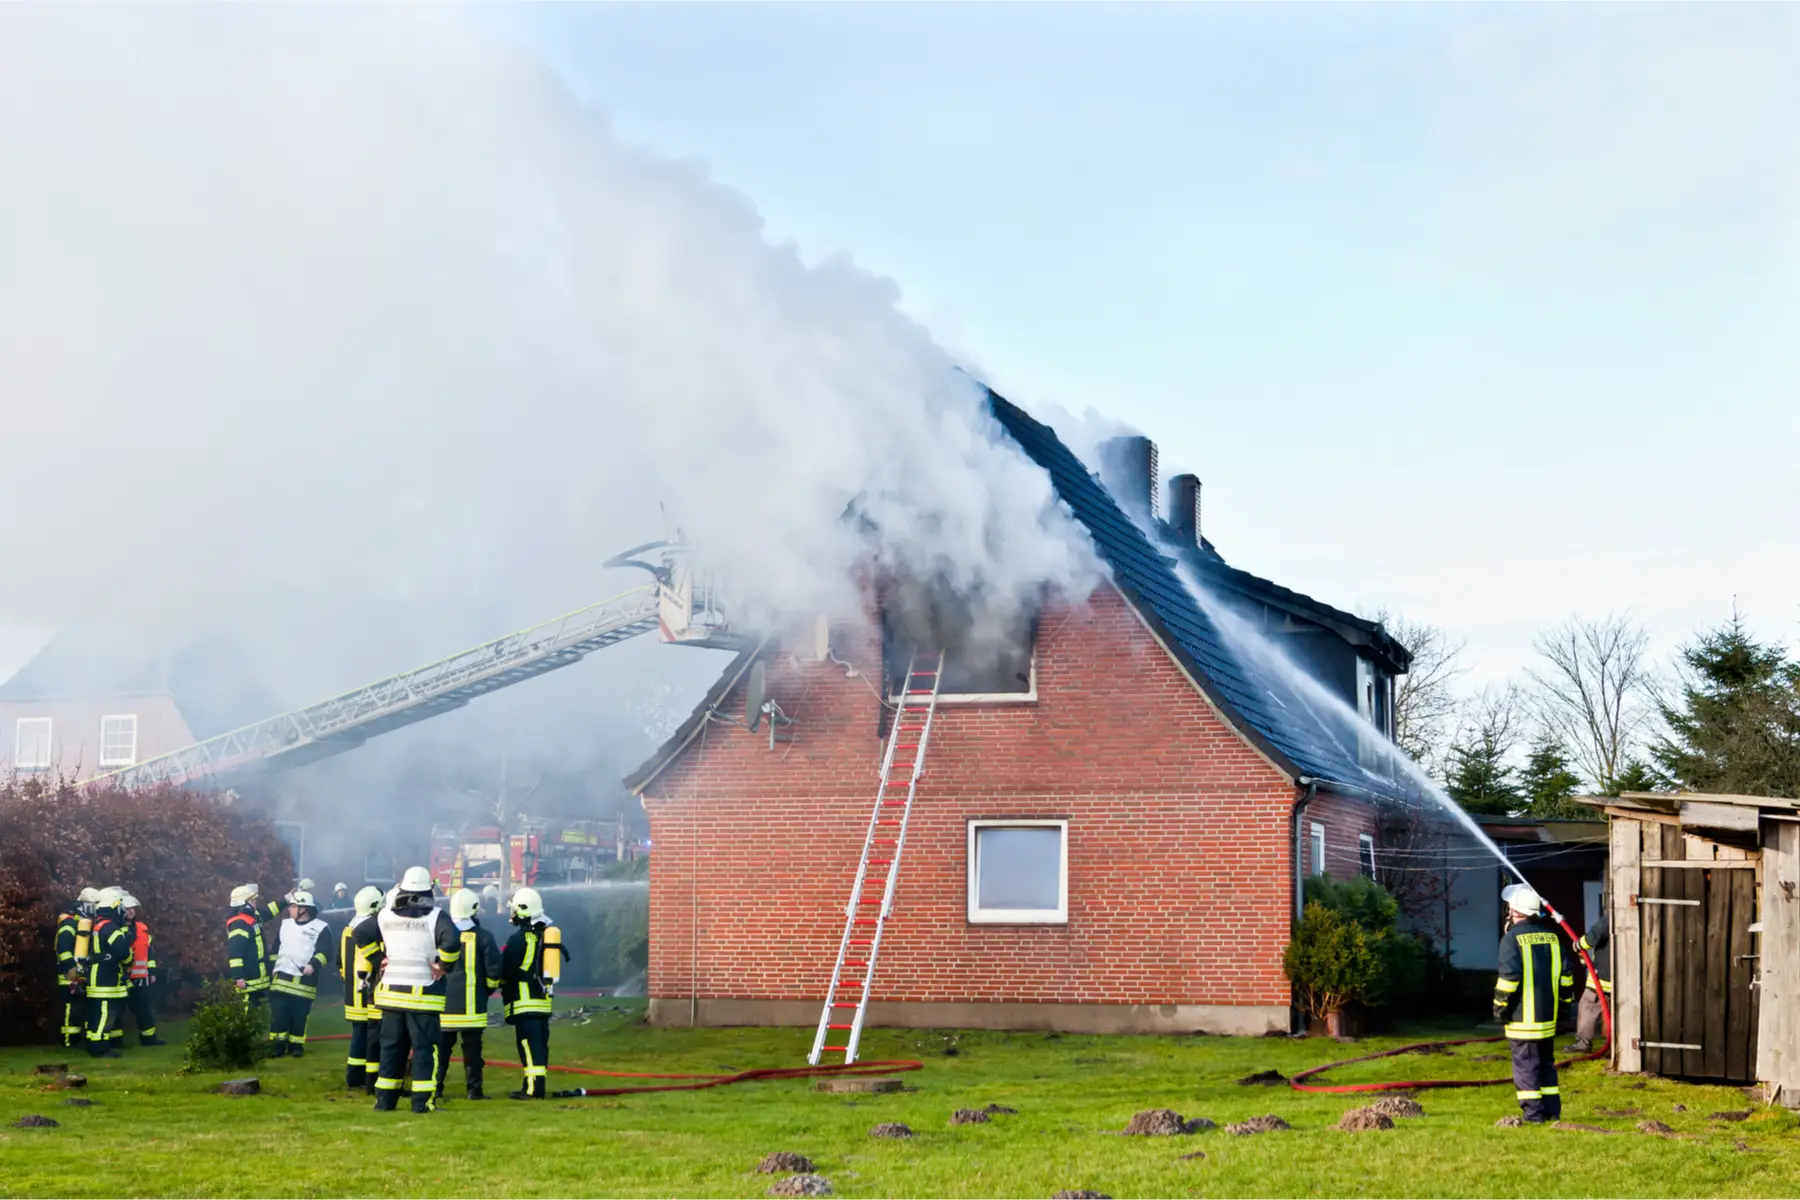 Firefighters battling a house fire in the UK